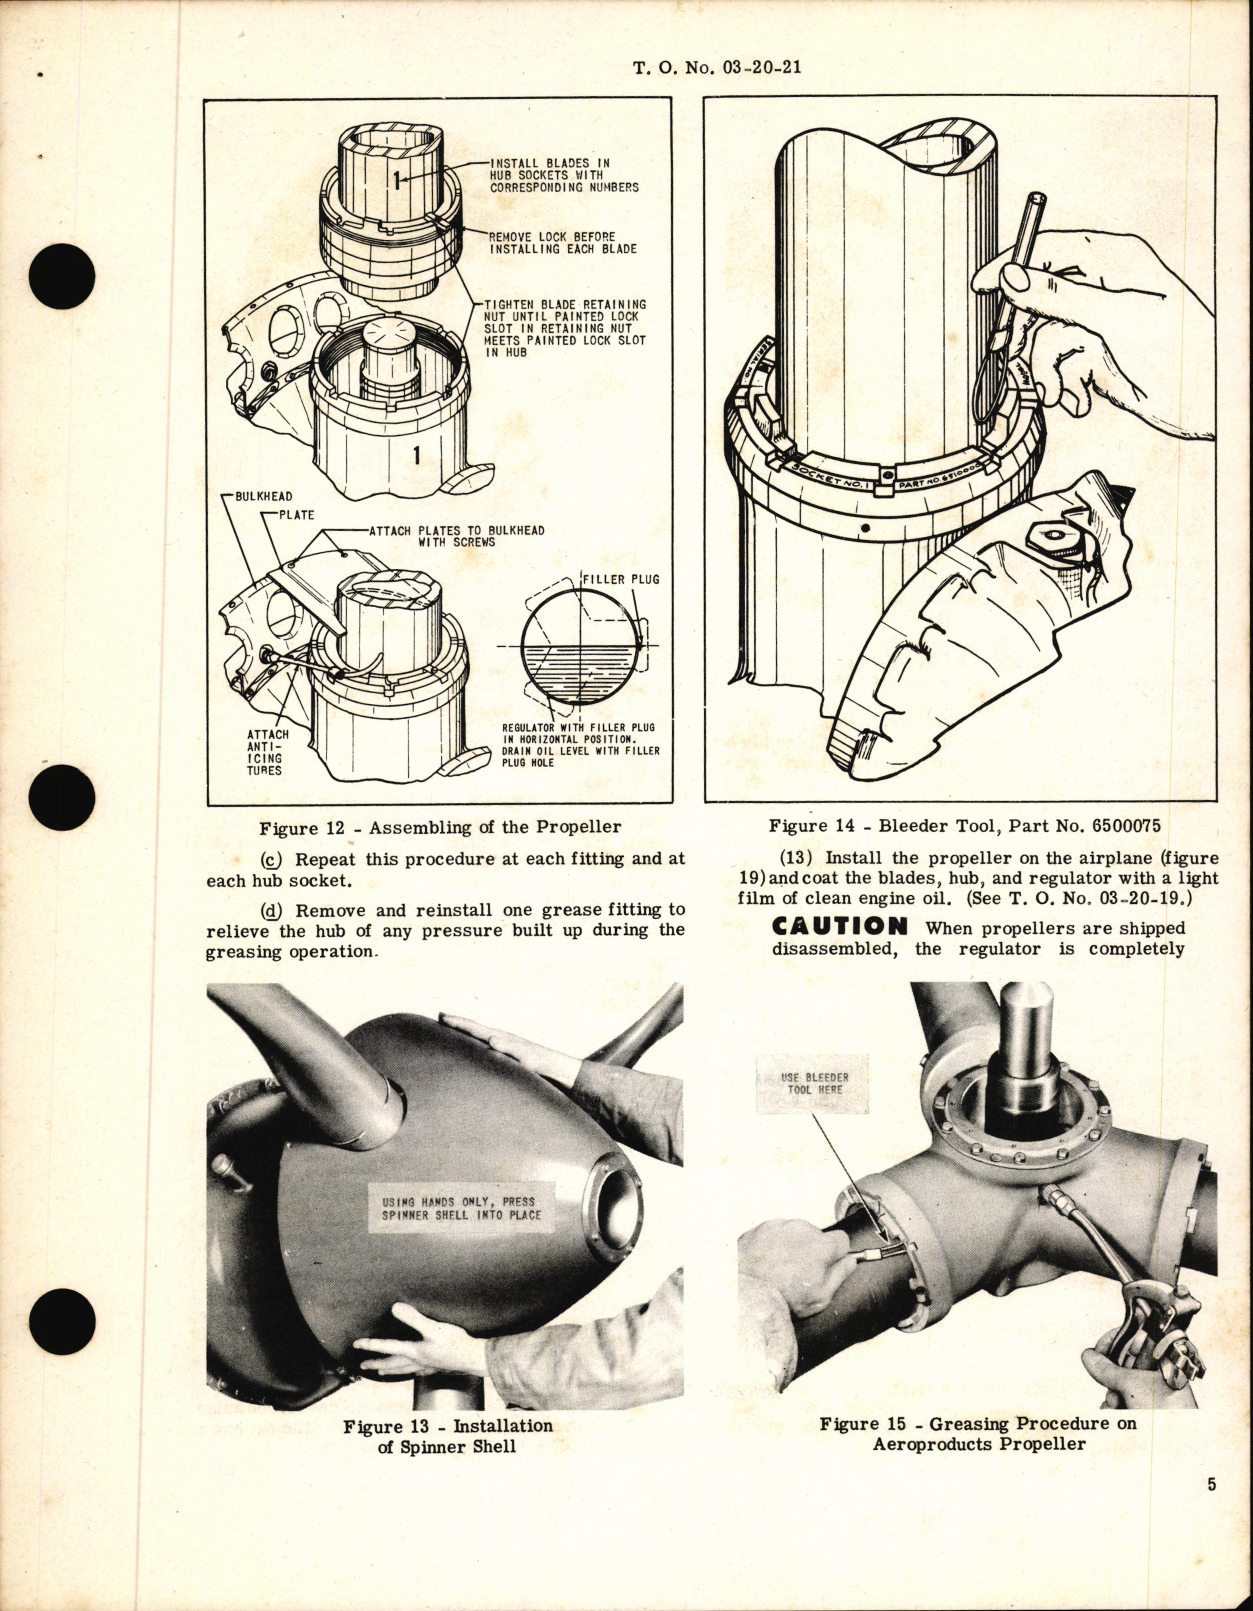 Sample page 5 from AirCorps Library document: Propellers and Accessories - Shipment of Disassembled Propellers 